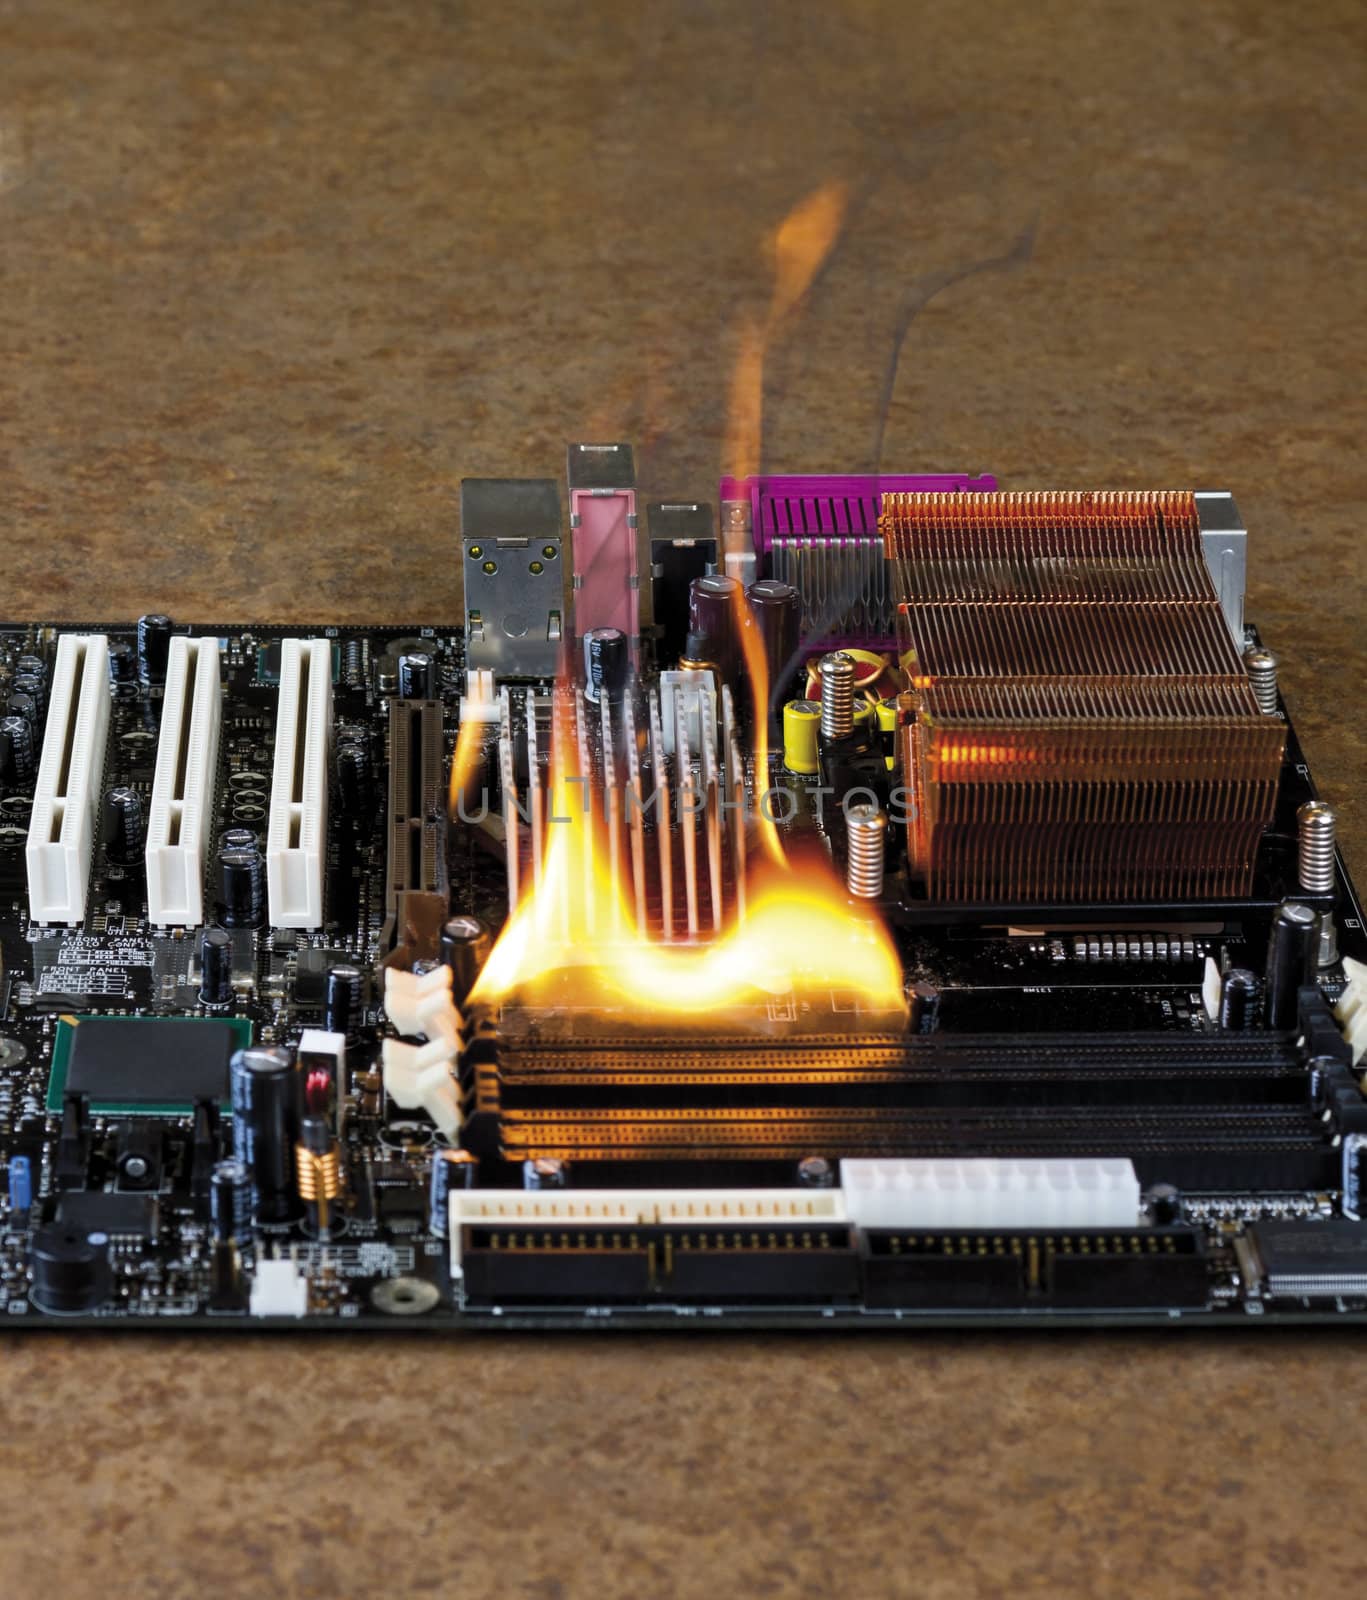 burning computer main board in rusty background